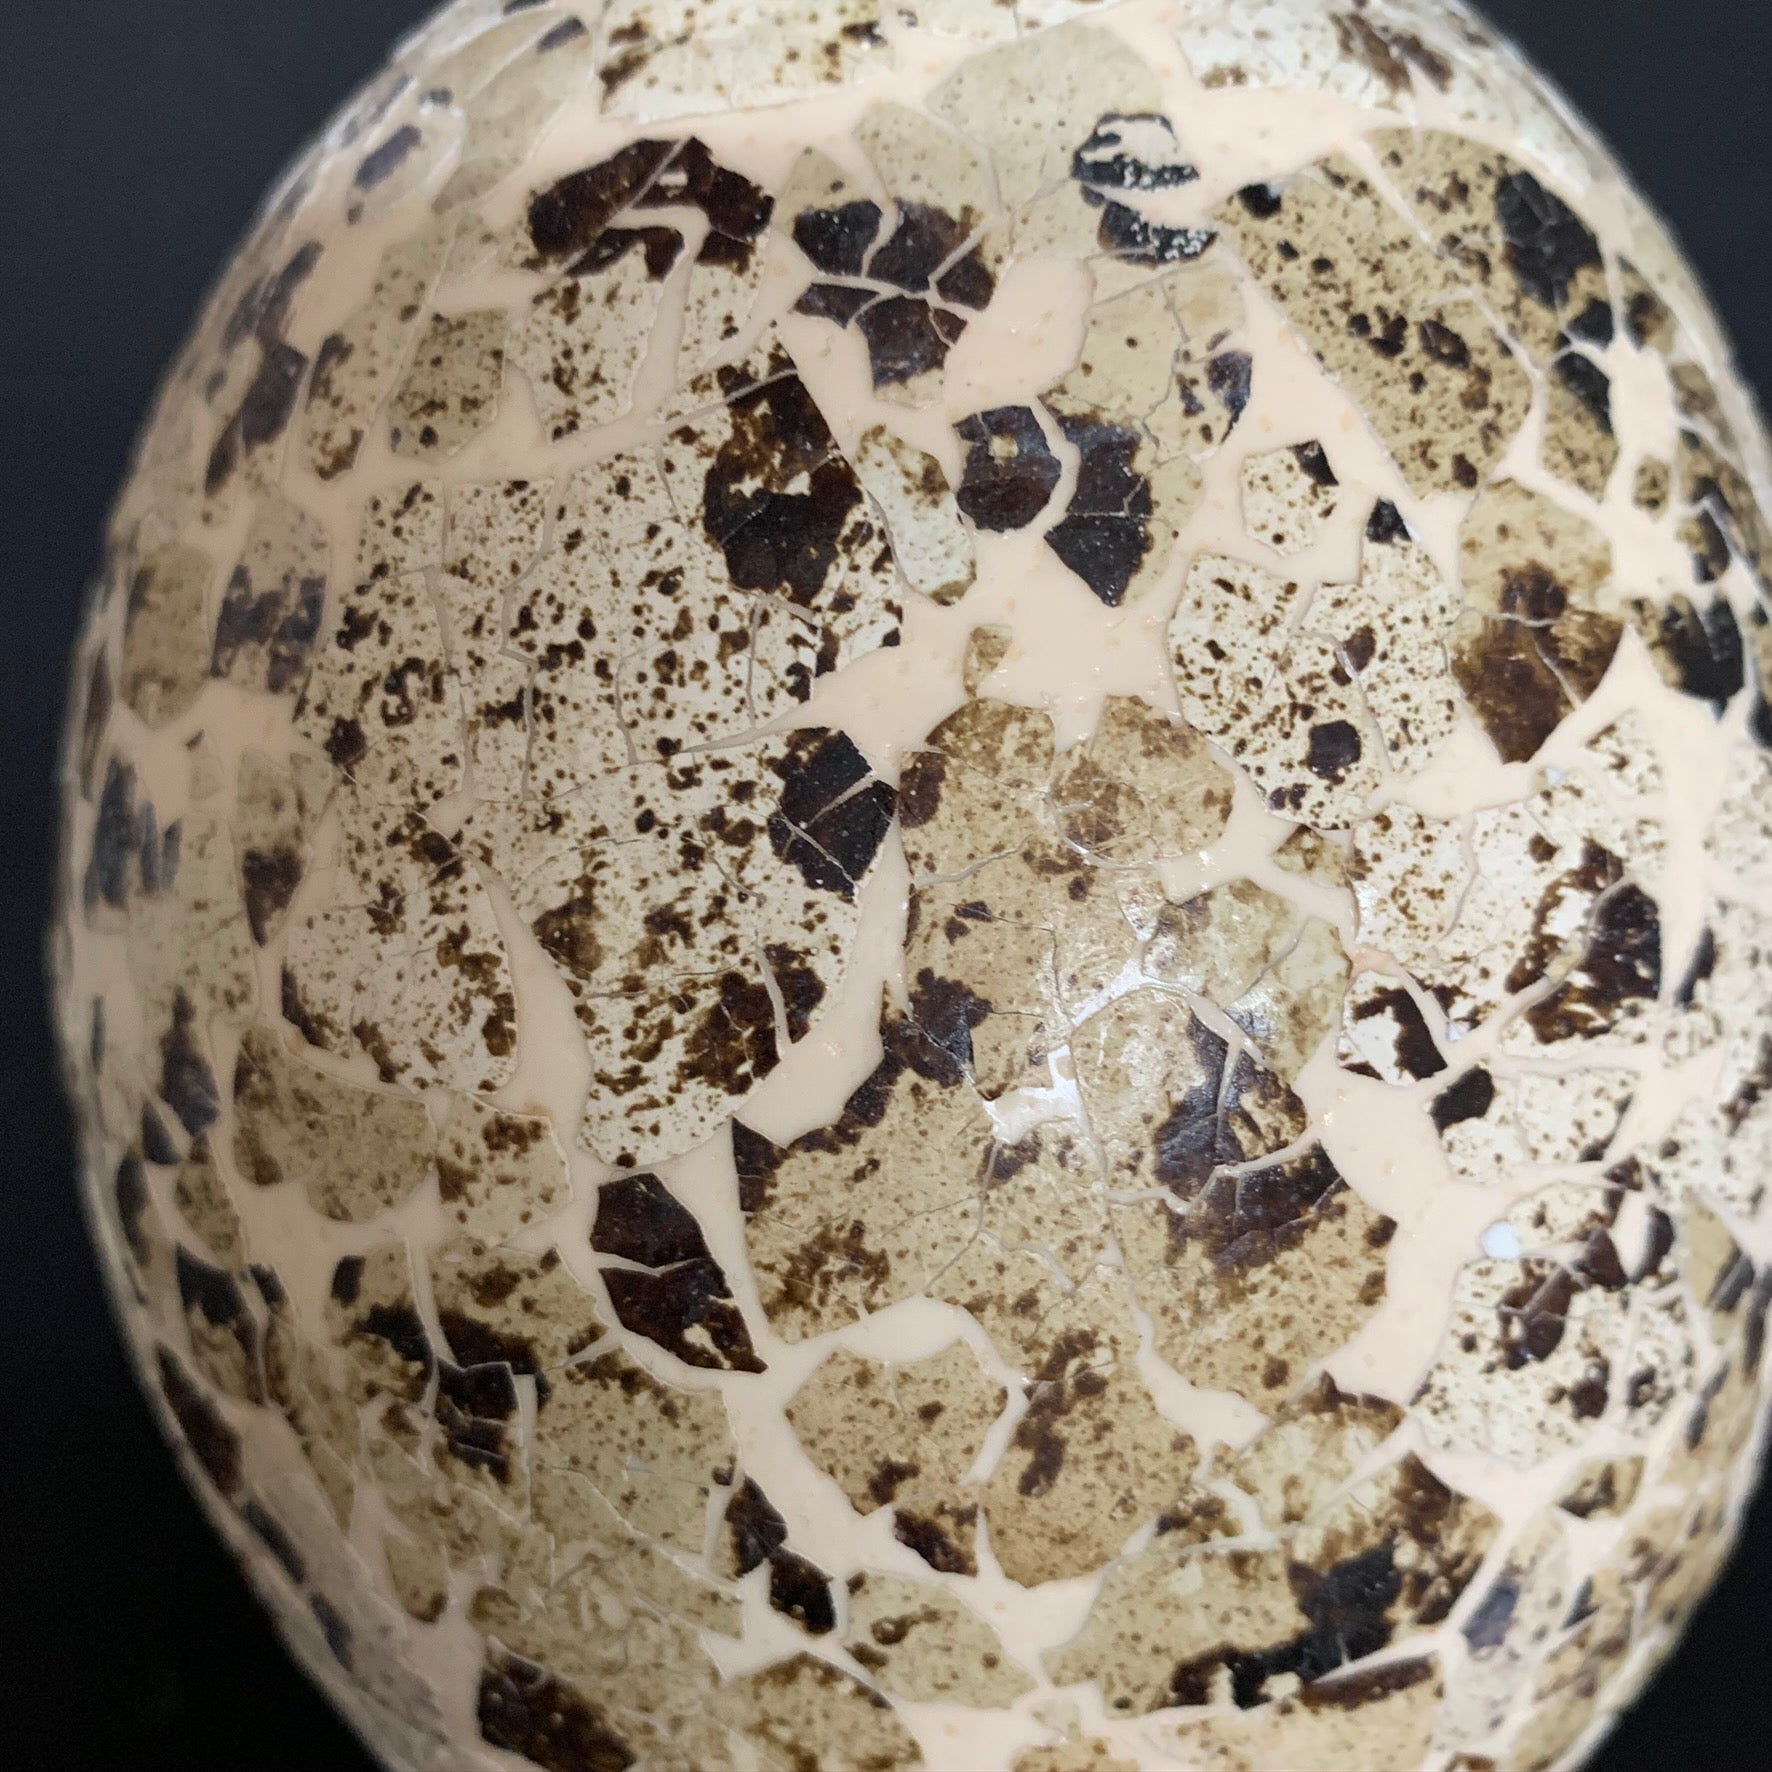 Ostrich egg decorated all around with quail egg shells